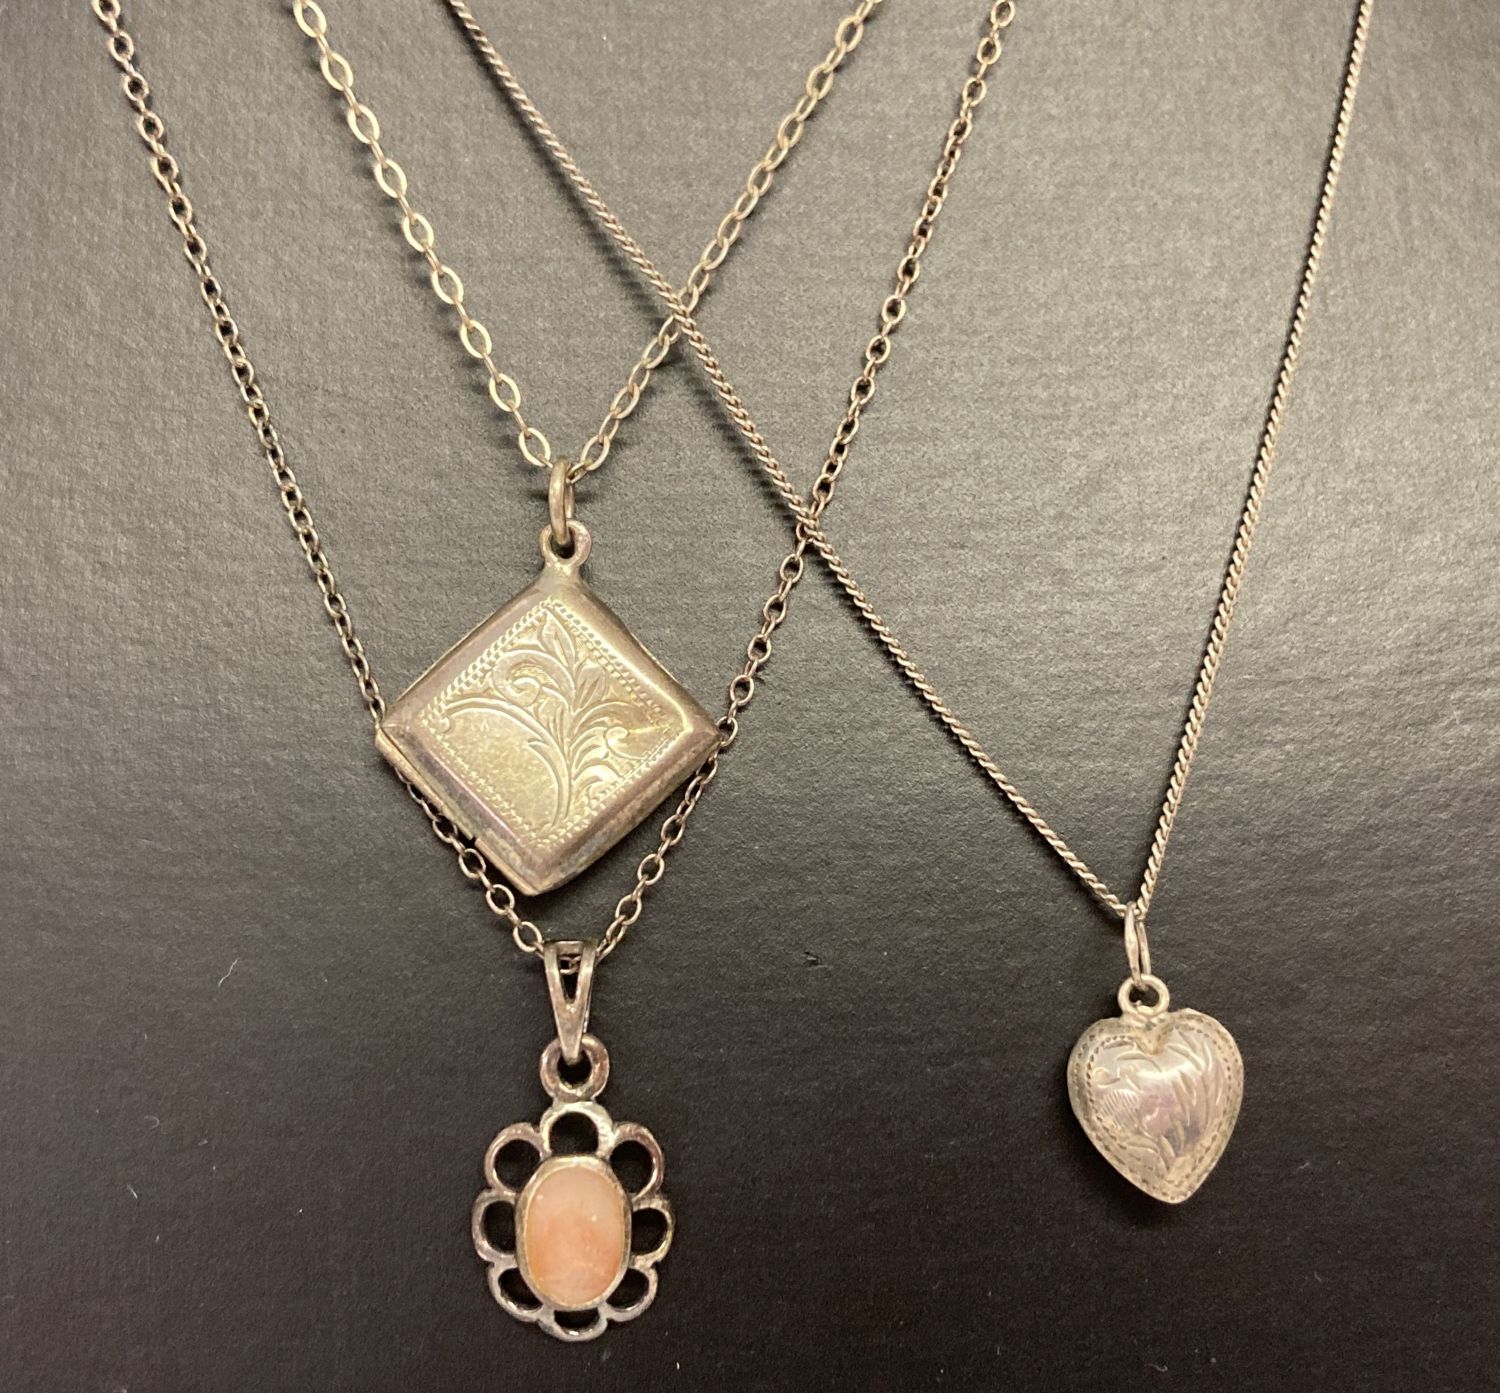 3 silver necklaces. A diamond shaped locket with floral engraving on a fine belcher chain.